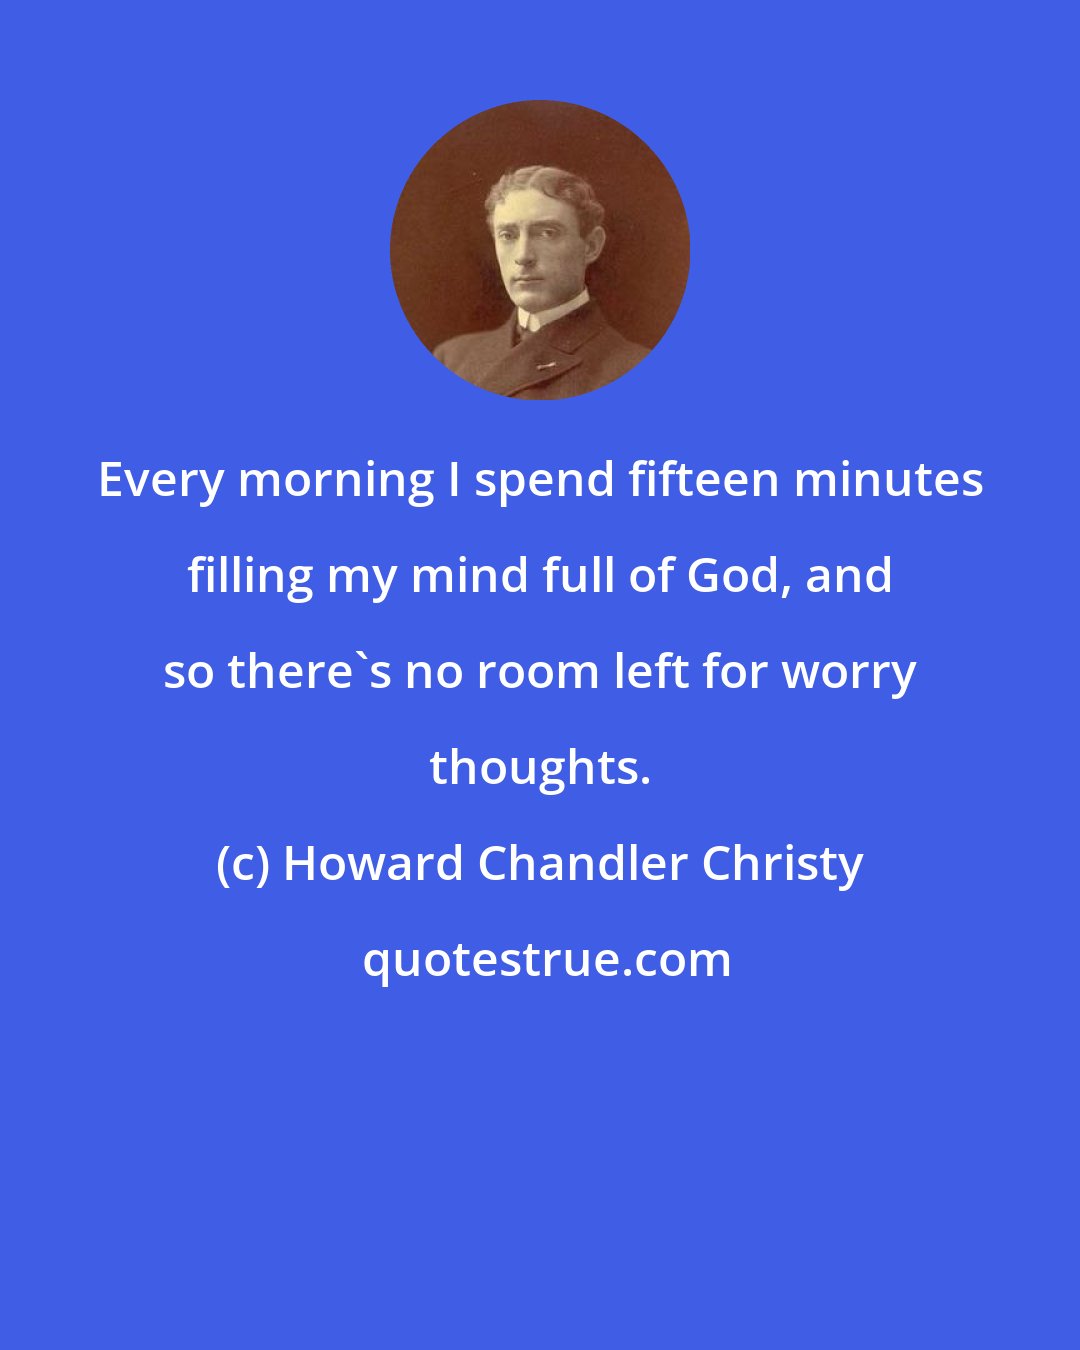 Howard Chandler Christy: Every morning I spend fifteen minutes filling my mind full of God, and so there's no room left for worry thoughts.